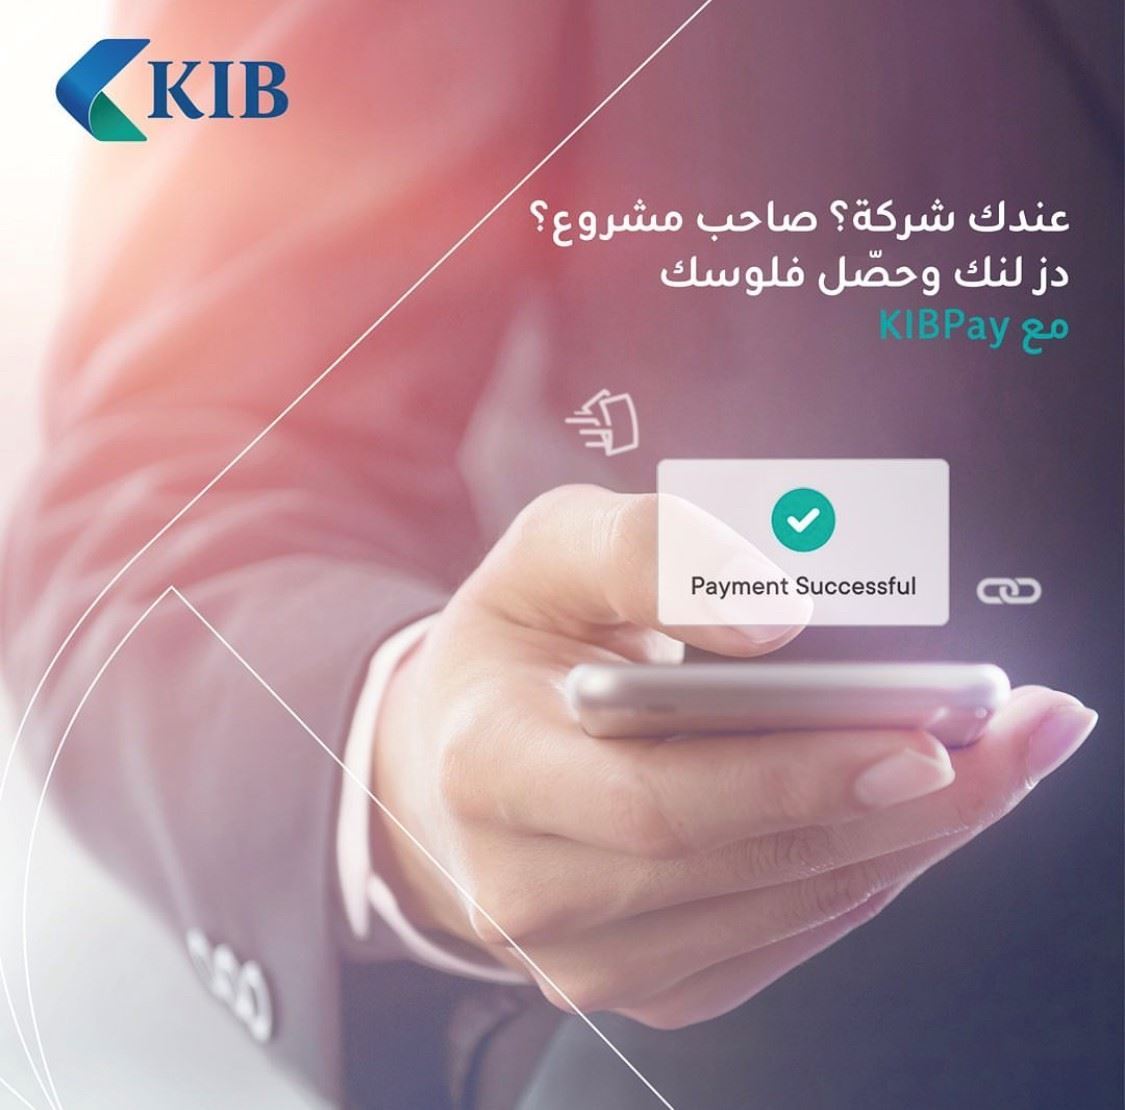 "KIB" provides its corporate clients with KIBPay service for higher efficiency in fund collecting